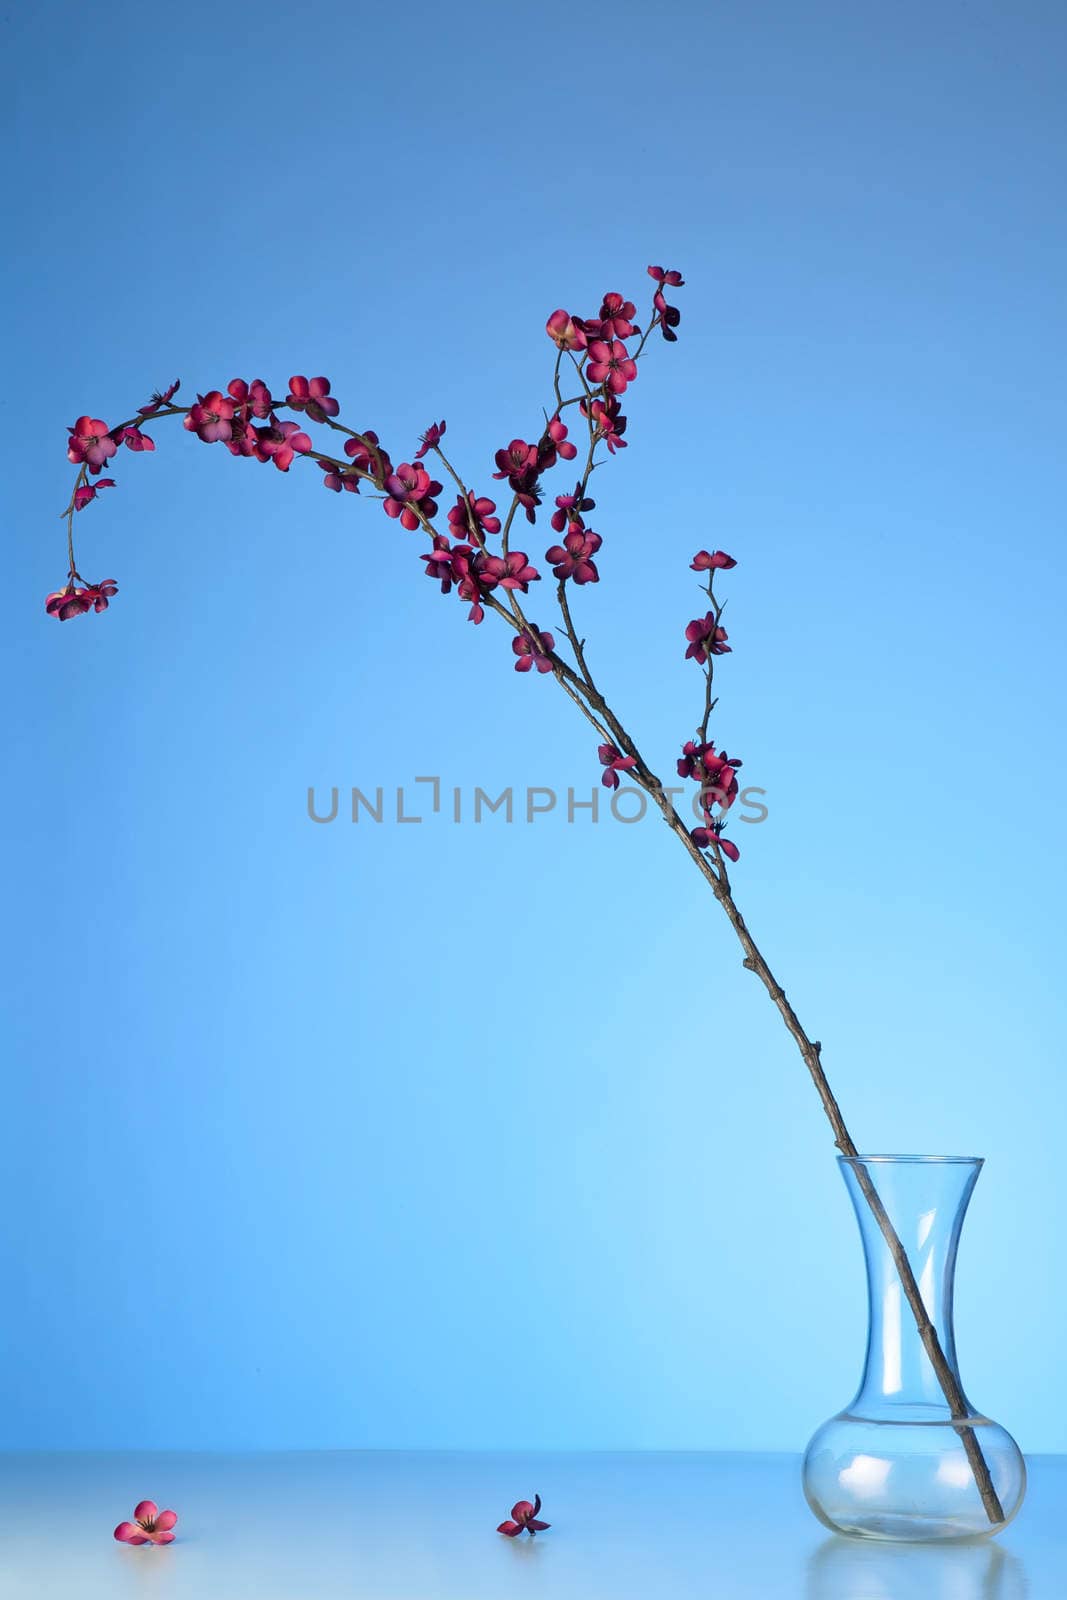 A single twig with red blossoms leans out of a vase against a blue background.